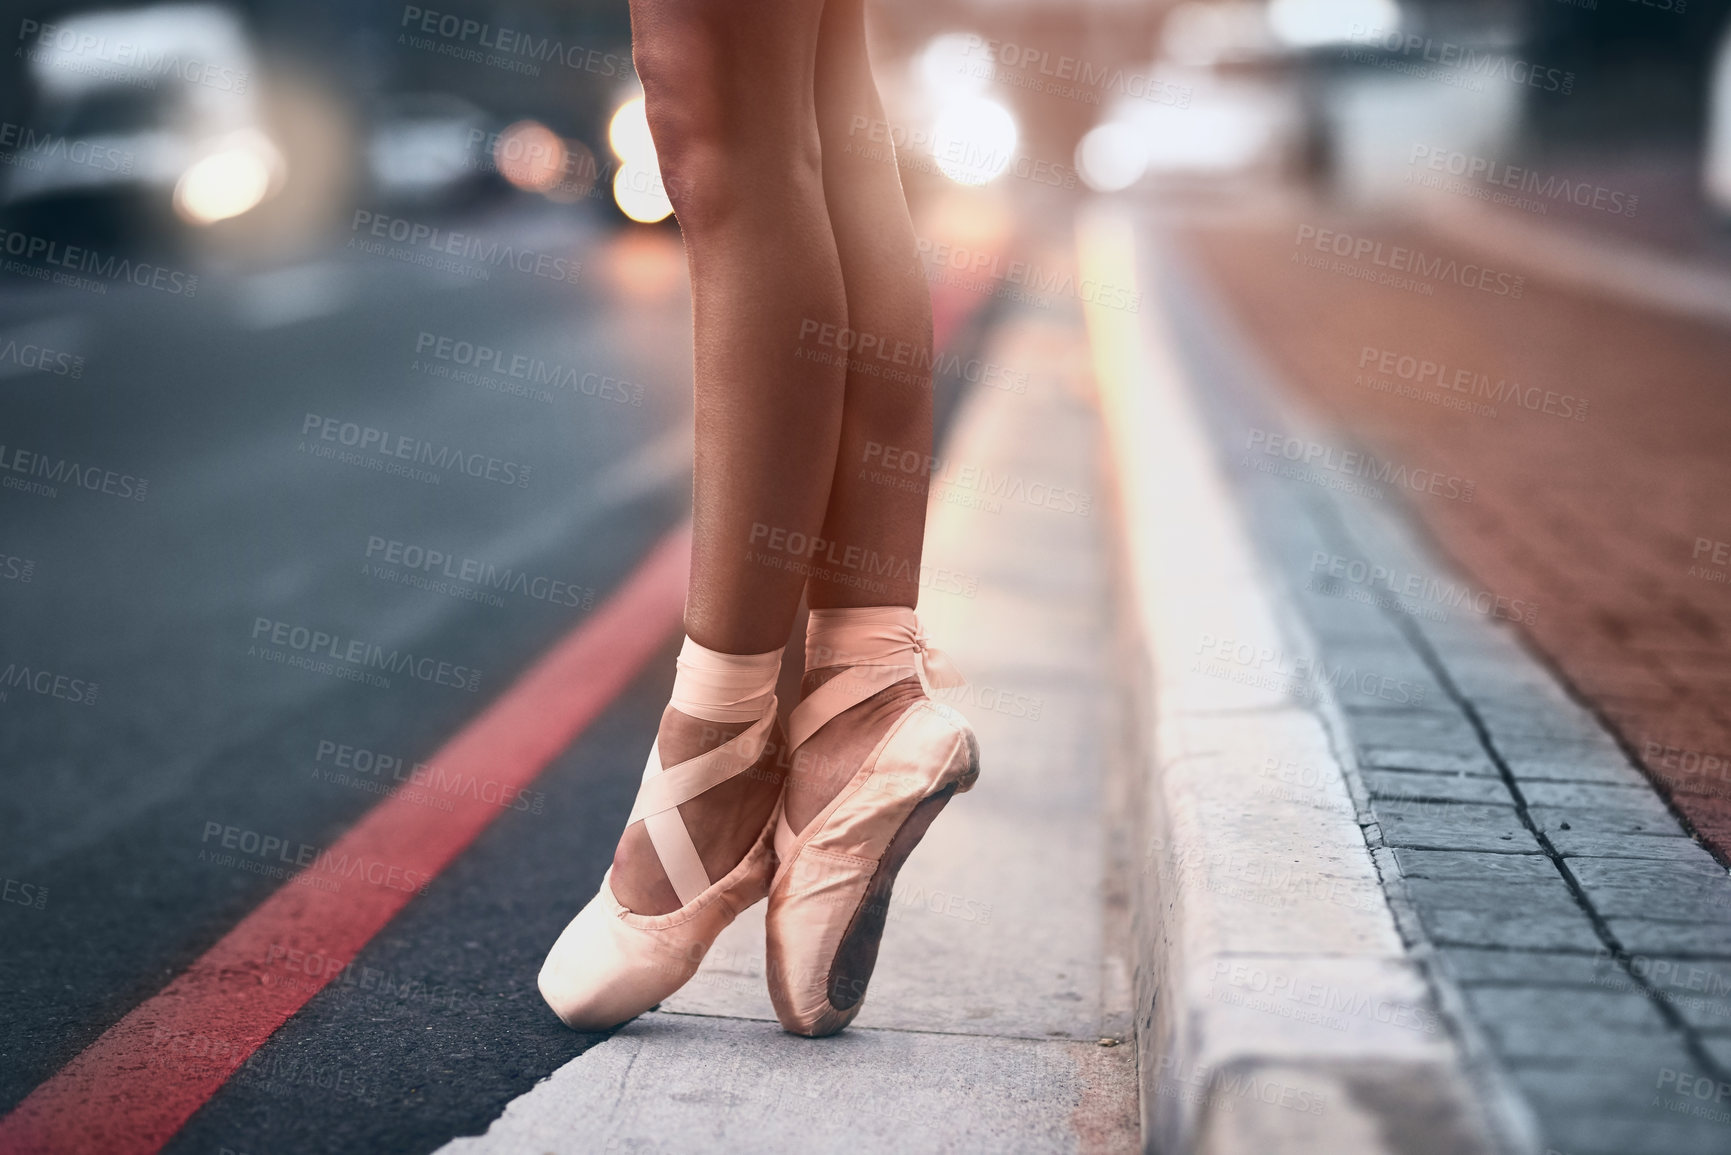 Buy stock photo Cropped shot of a ballet dancer standing on tiptoes against an urban background